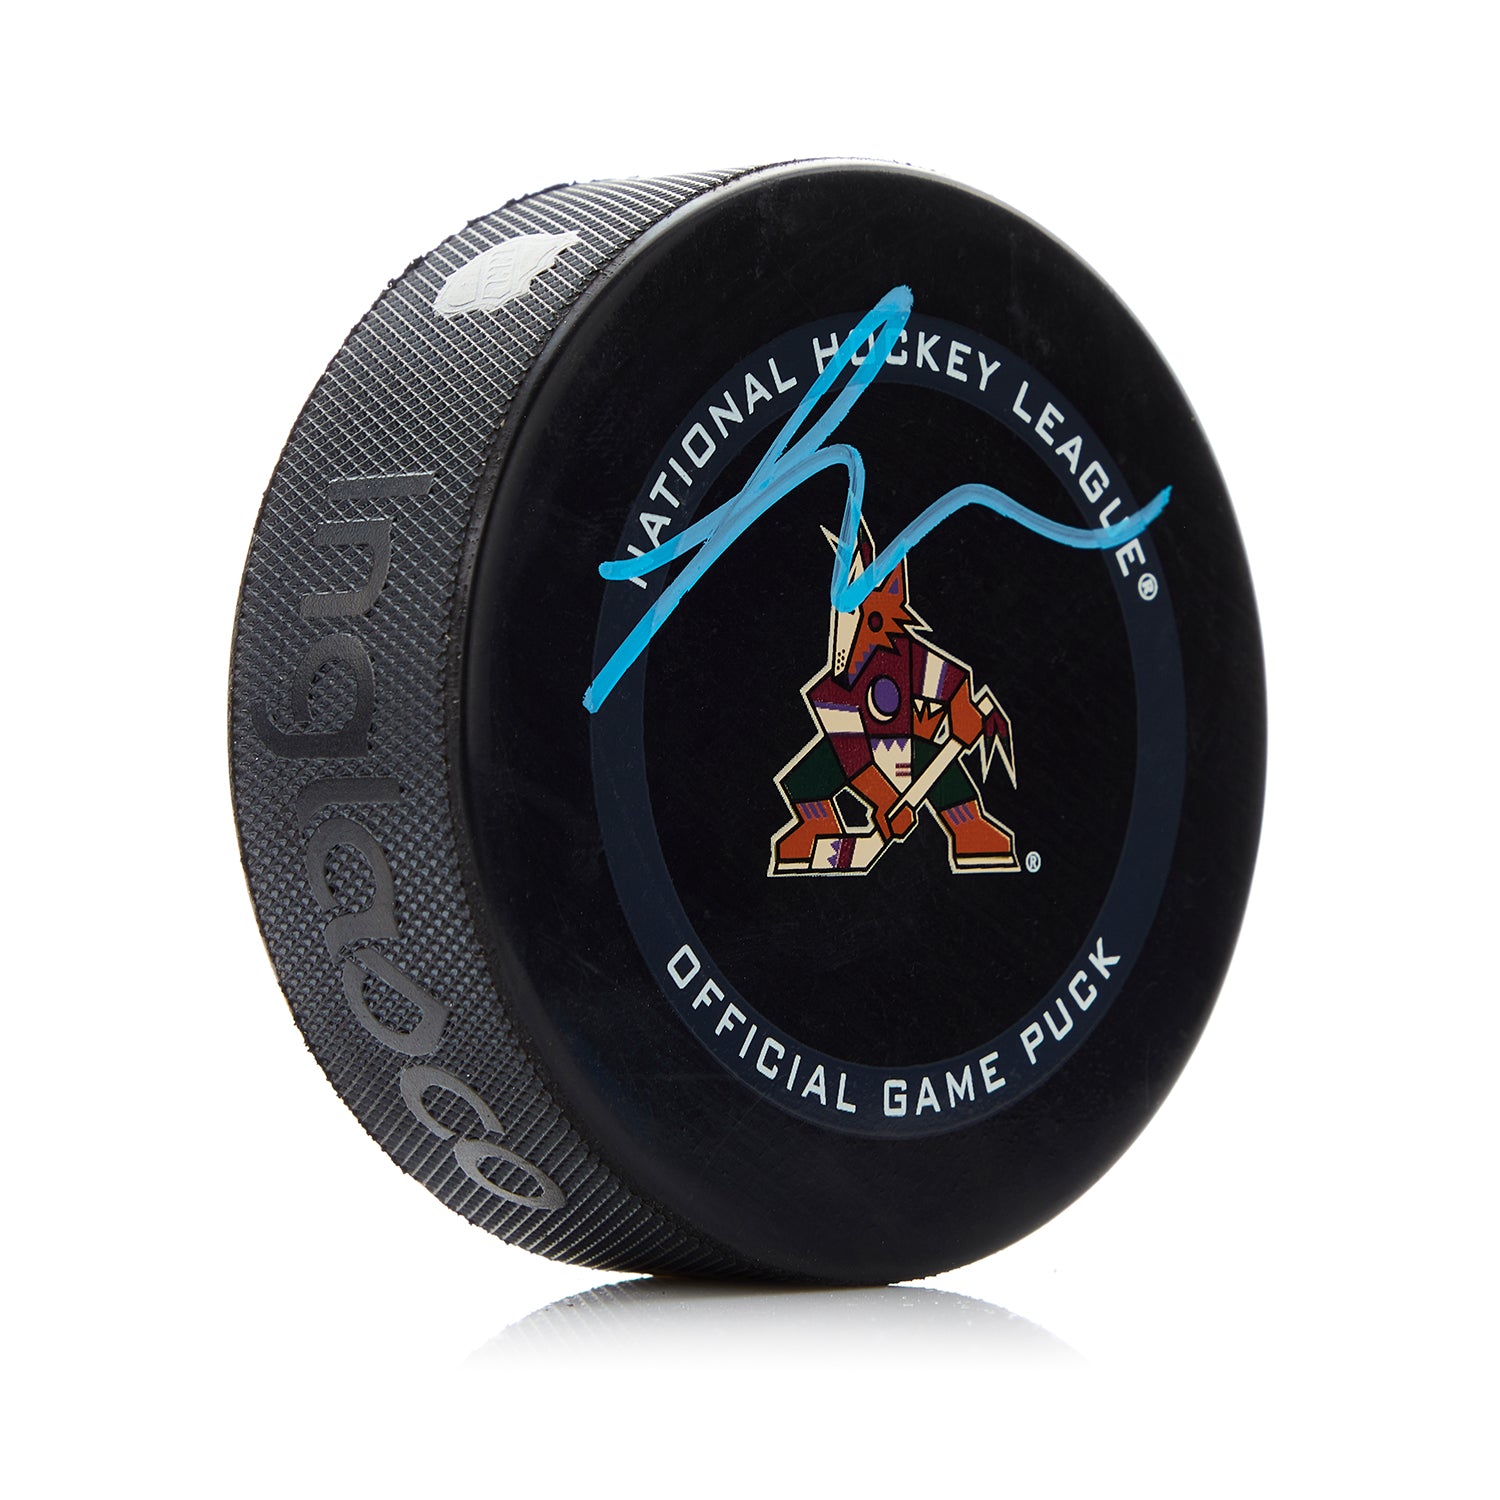 Logan Cooley Signed Arizona Coyotes Official Game Puck